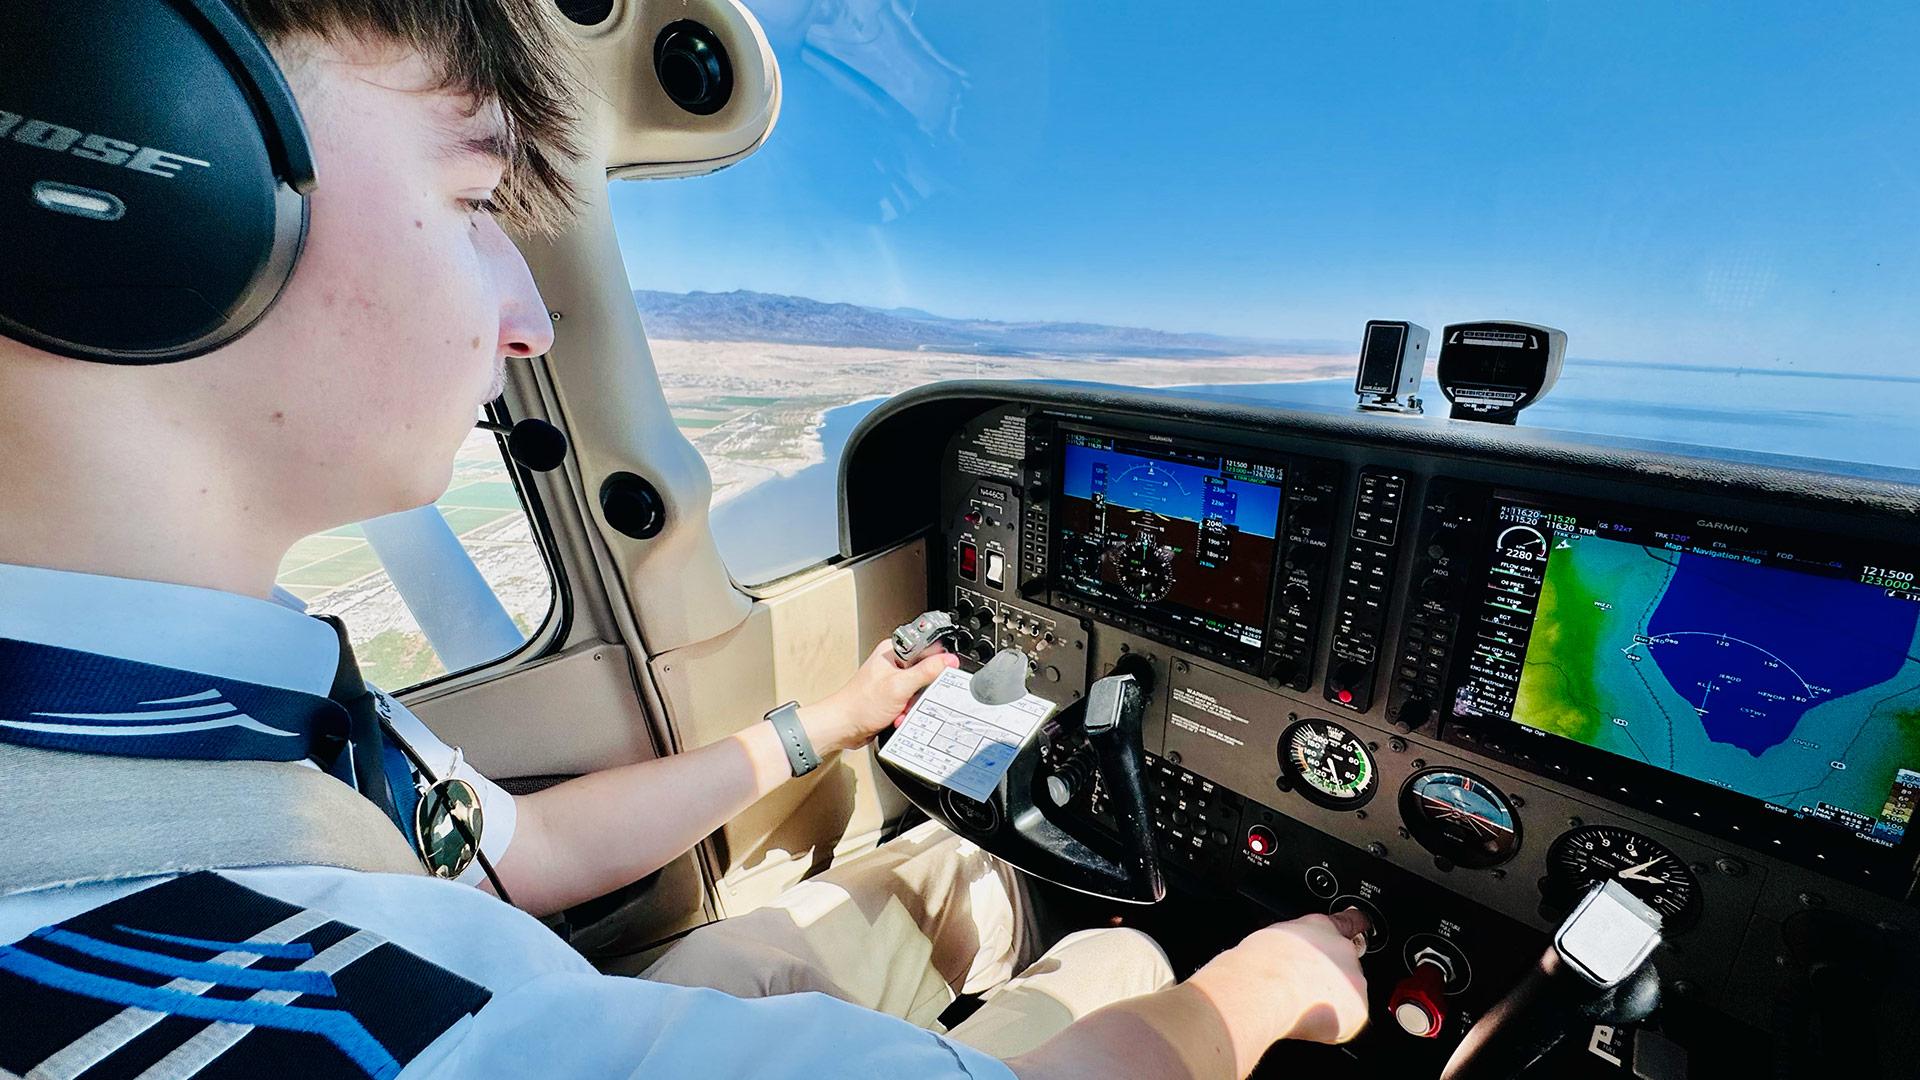 ACP Student Yarne training for his EASA and FAA Licenses.